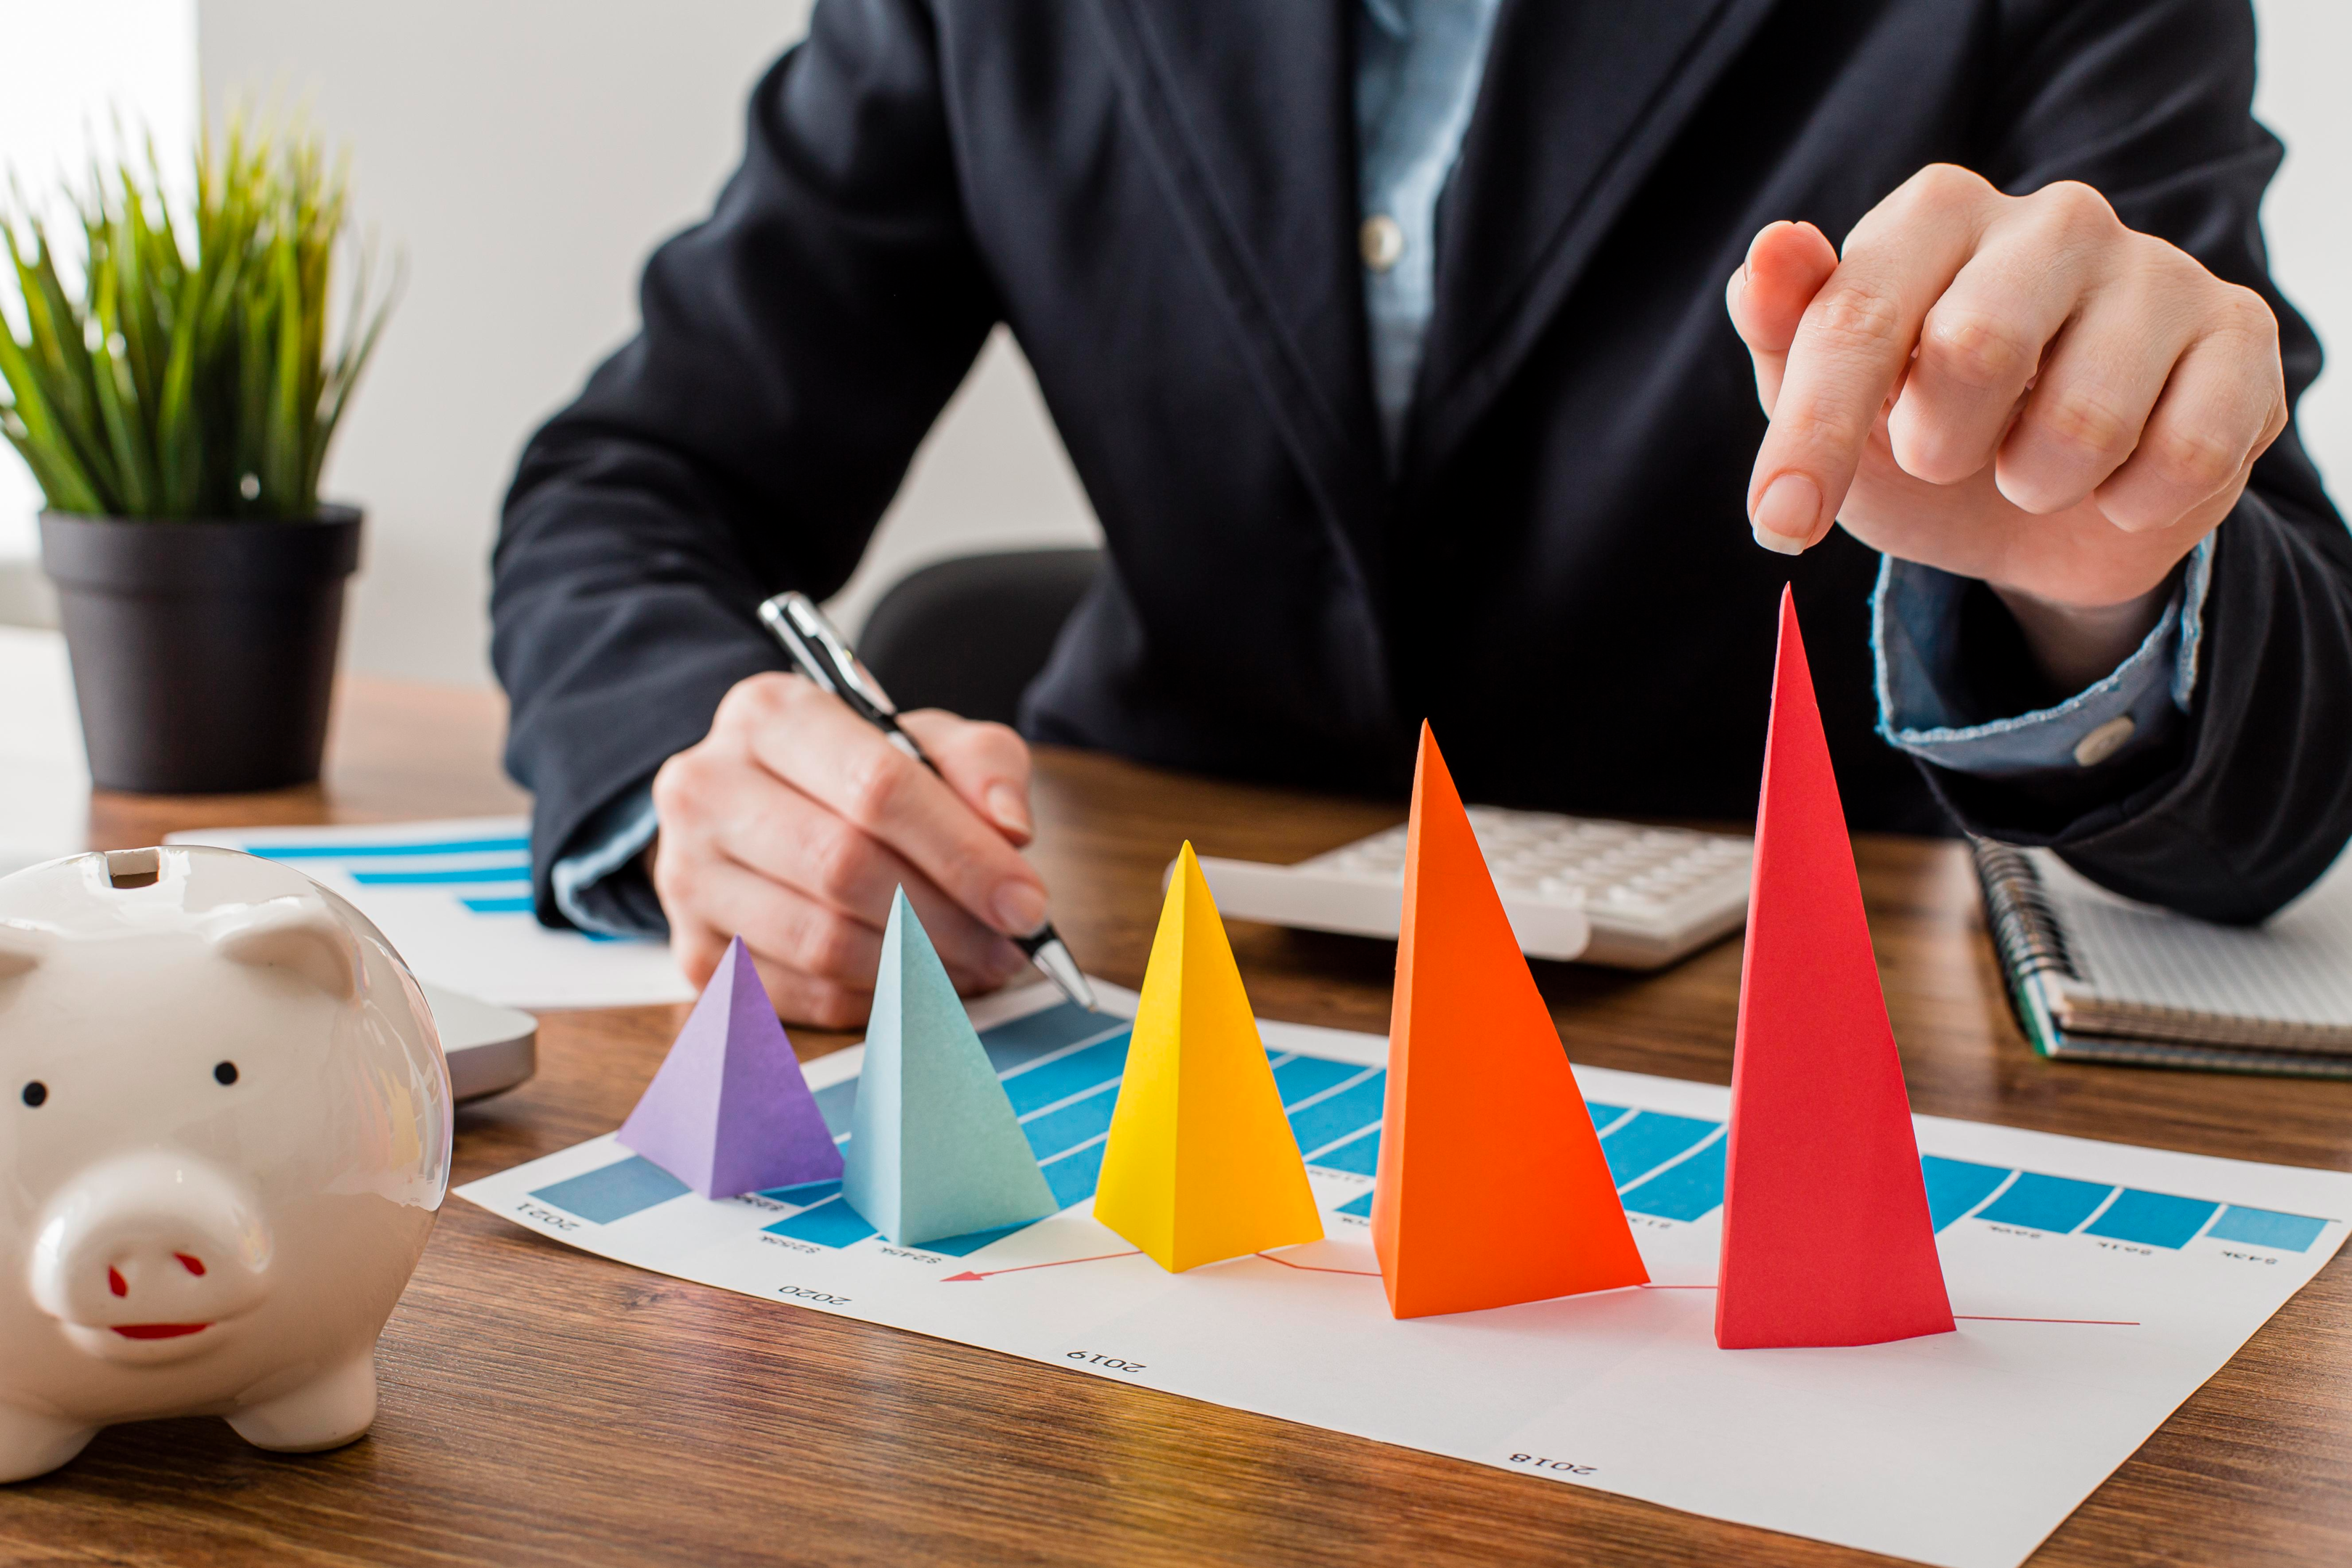 https://www.freepik.com/free-photo/front-view-businessman-with-colorful-cones-representing-growth_11383075.htm#page=2&query=cost%20efficient&position=48&from_view=search&track=ais